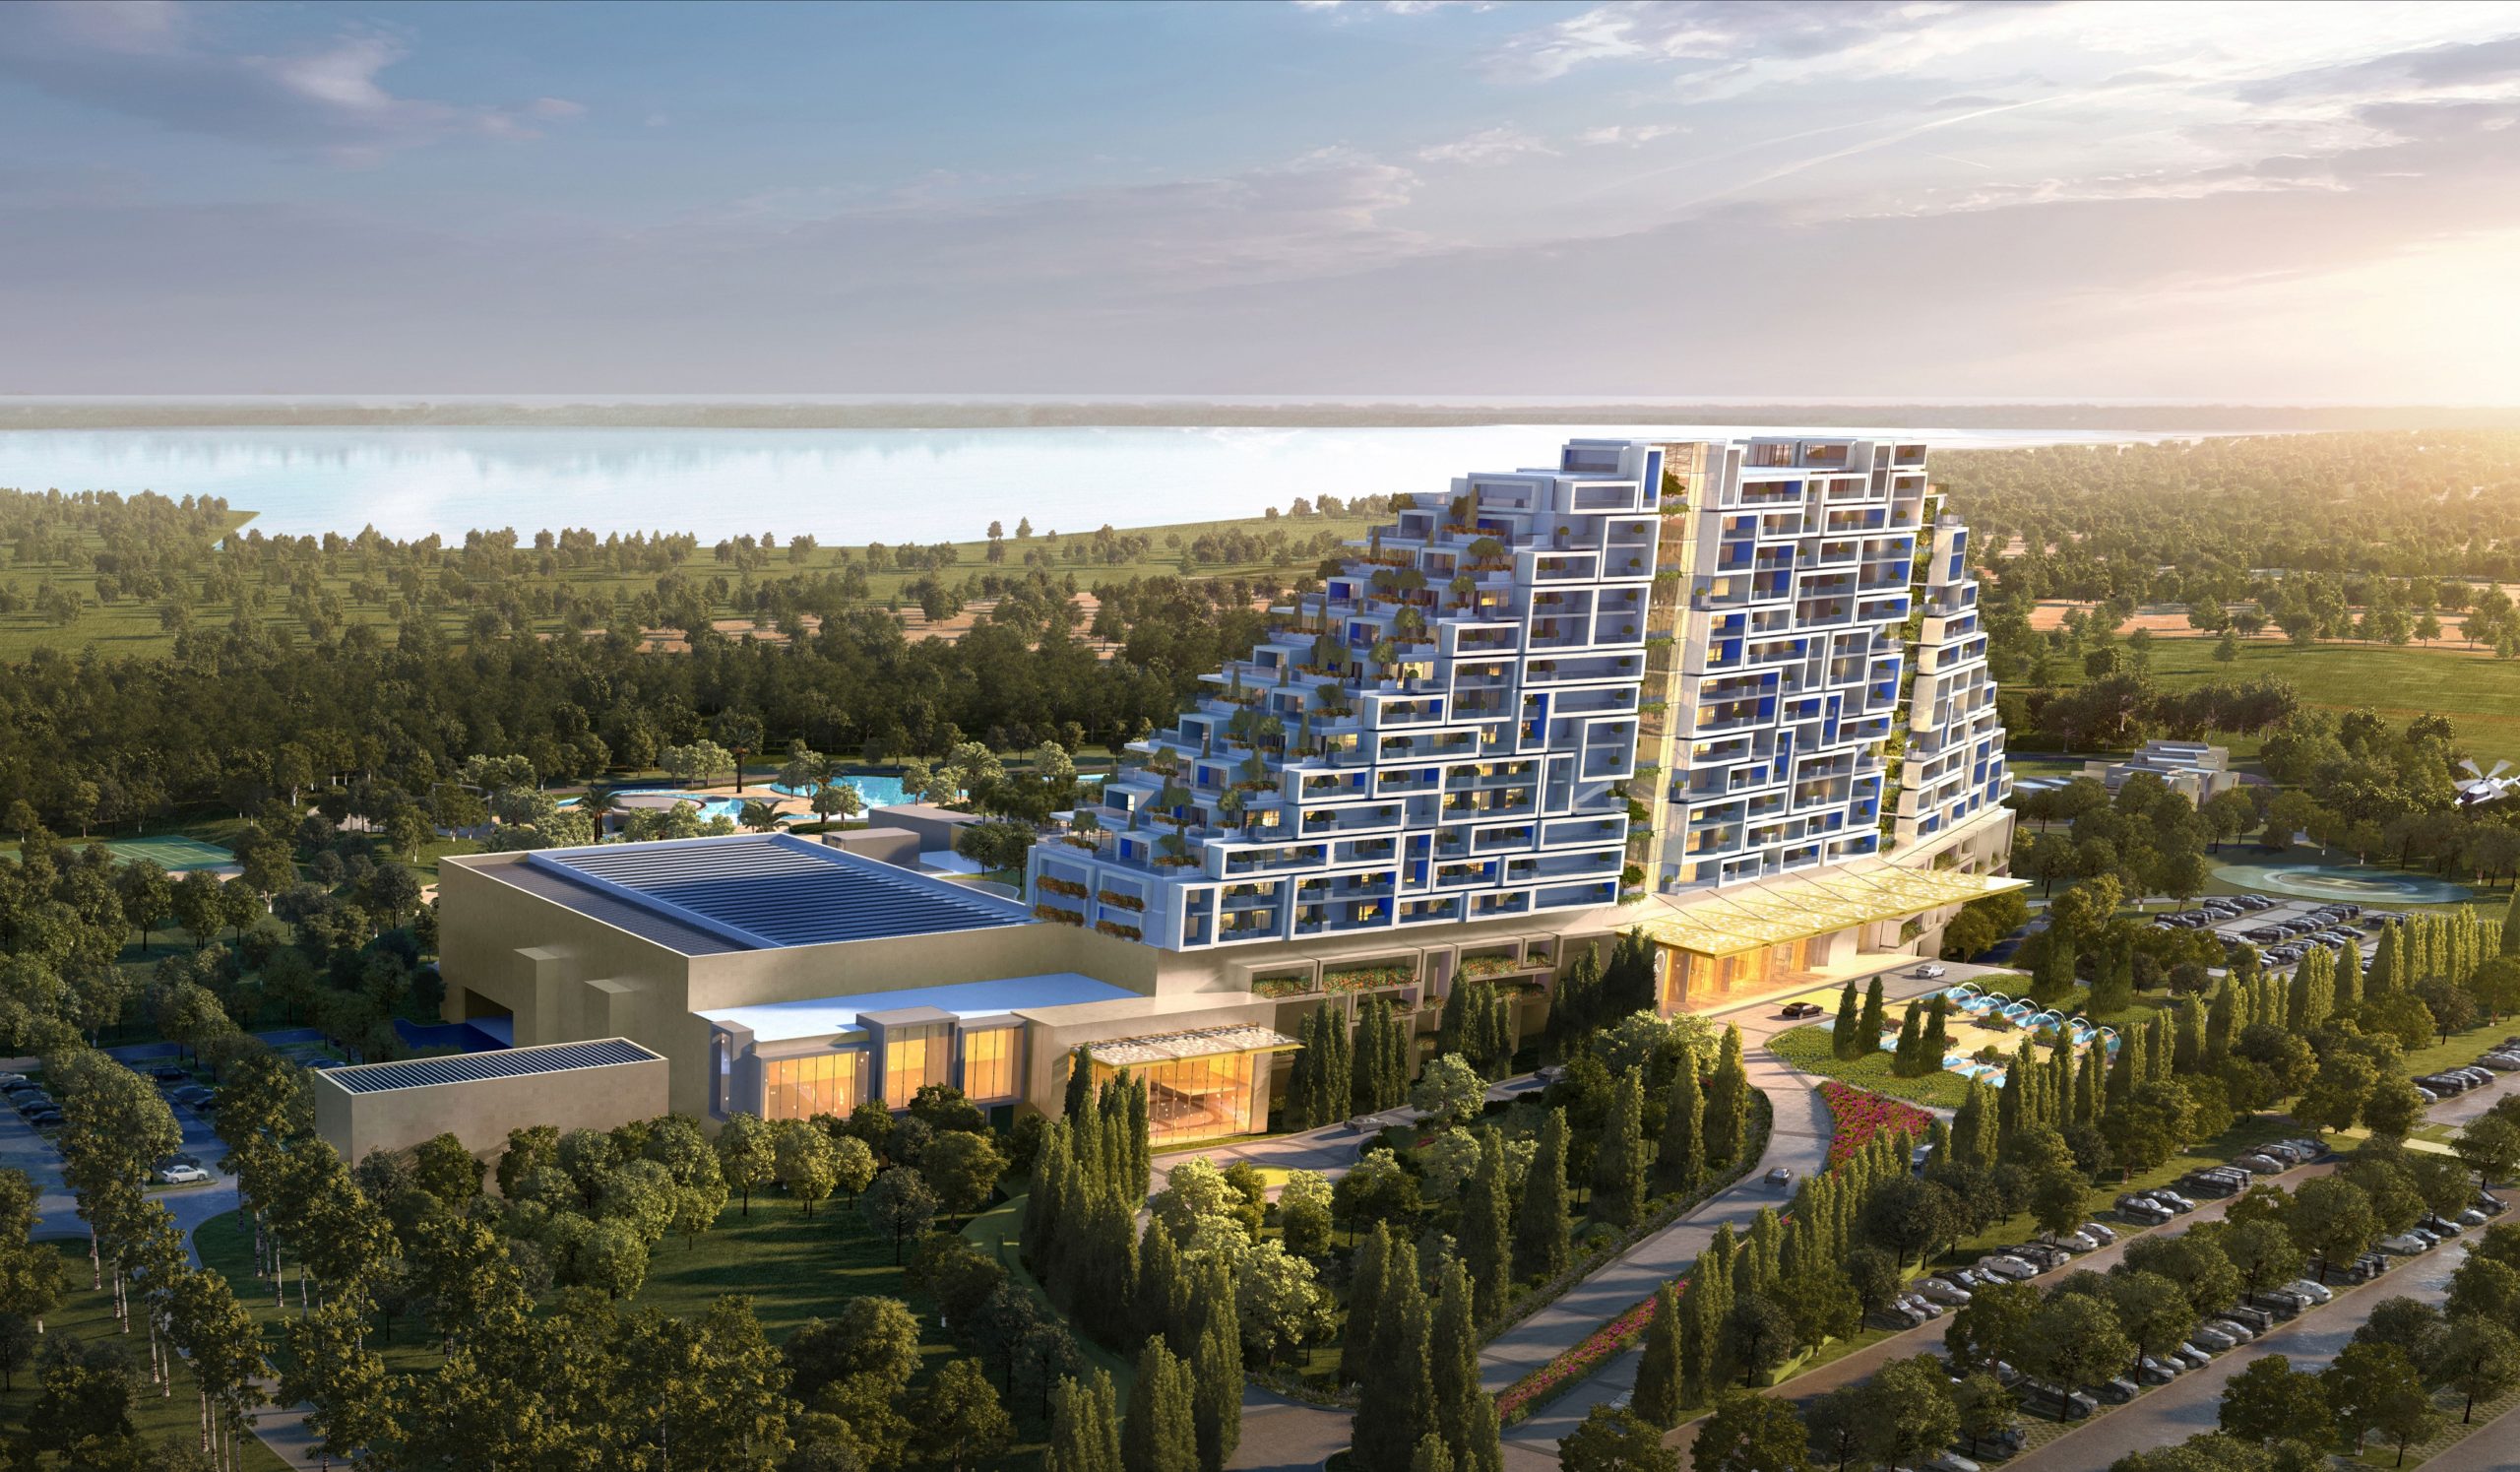 Europe’s largest casino confirms summer 2022 opening